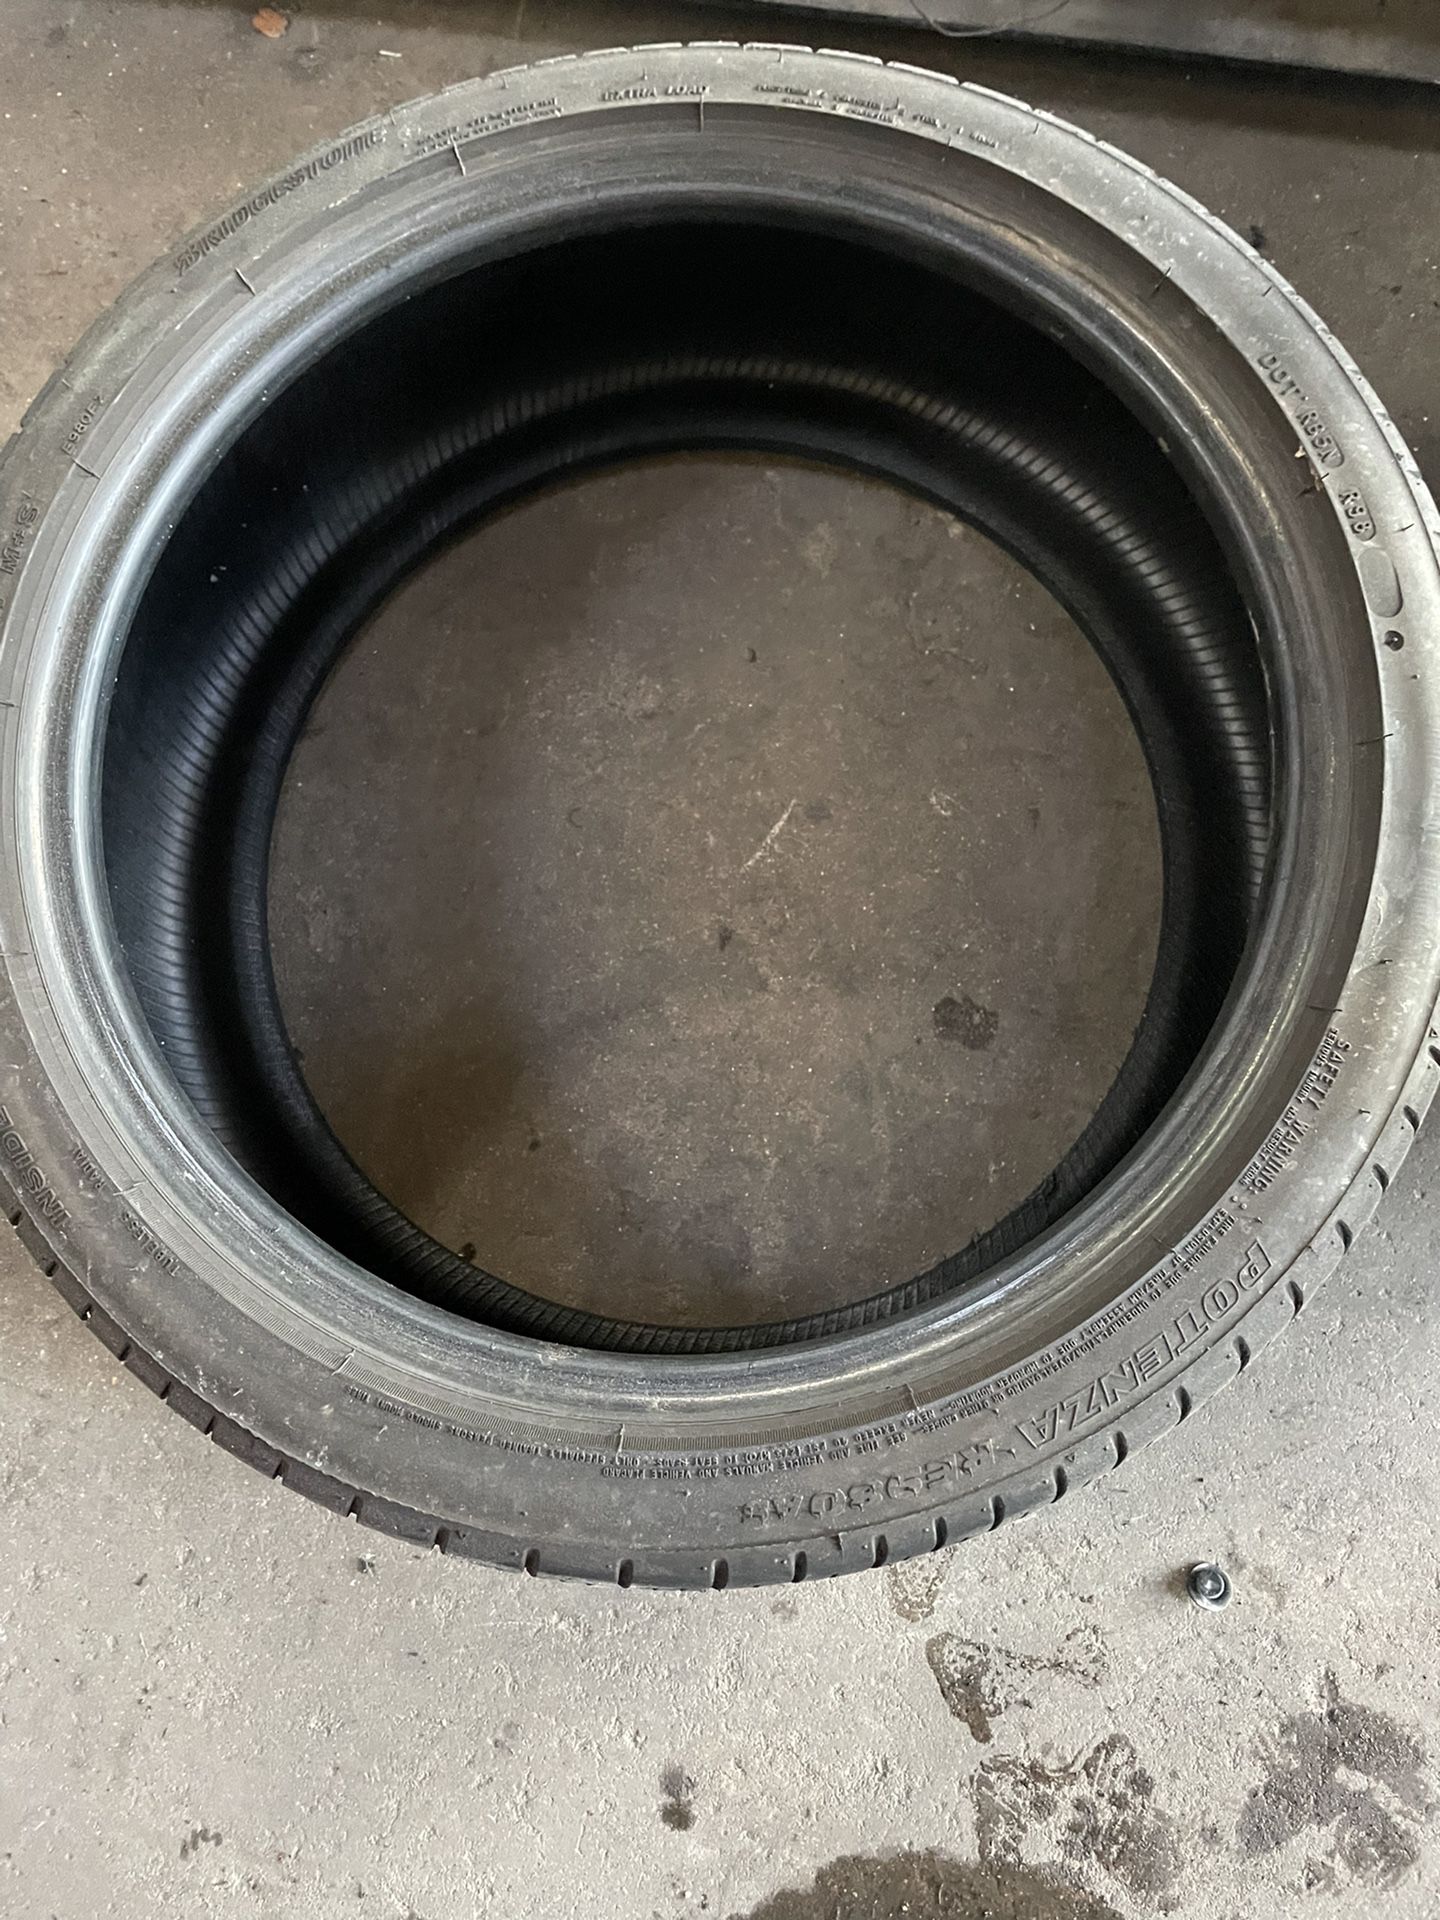 2 … 22540R18 Bridgestone Potenza Run flat Tires For $120 for The Pair Picked Up Or $150 Installed And Balanced .  Texas Extreme Tire Co 1305 Presto